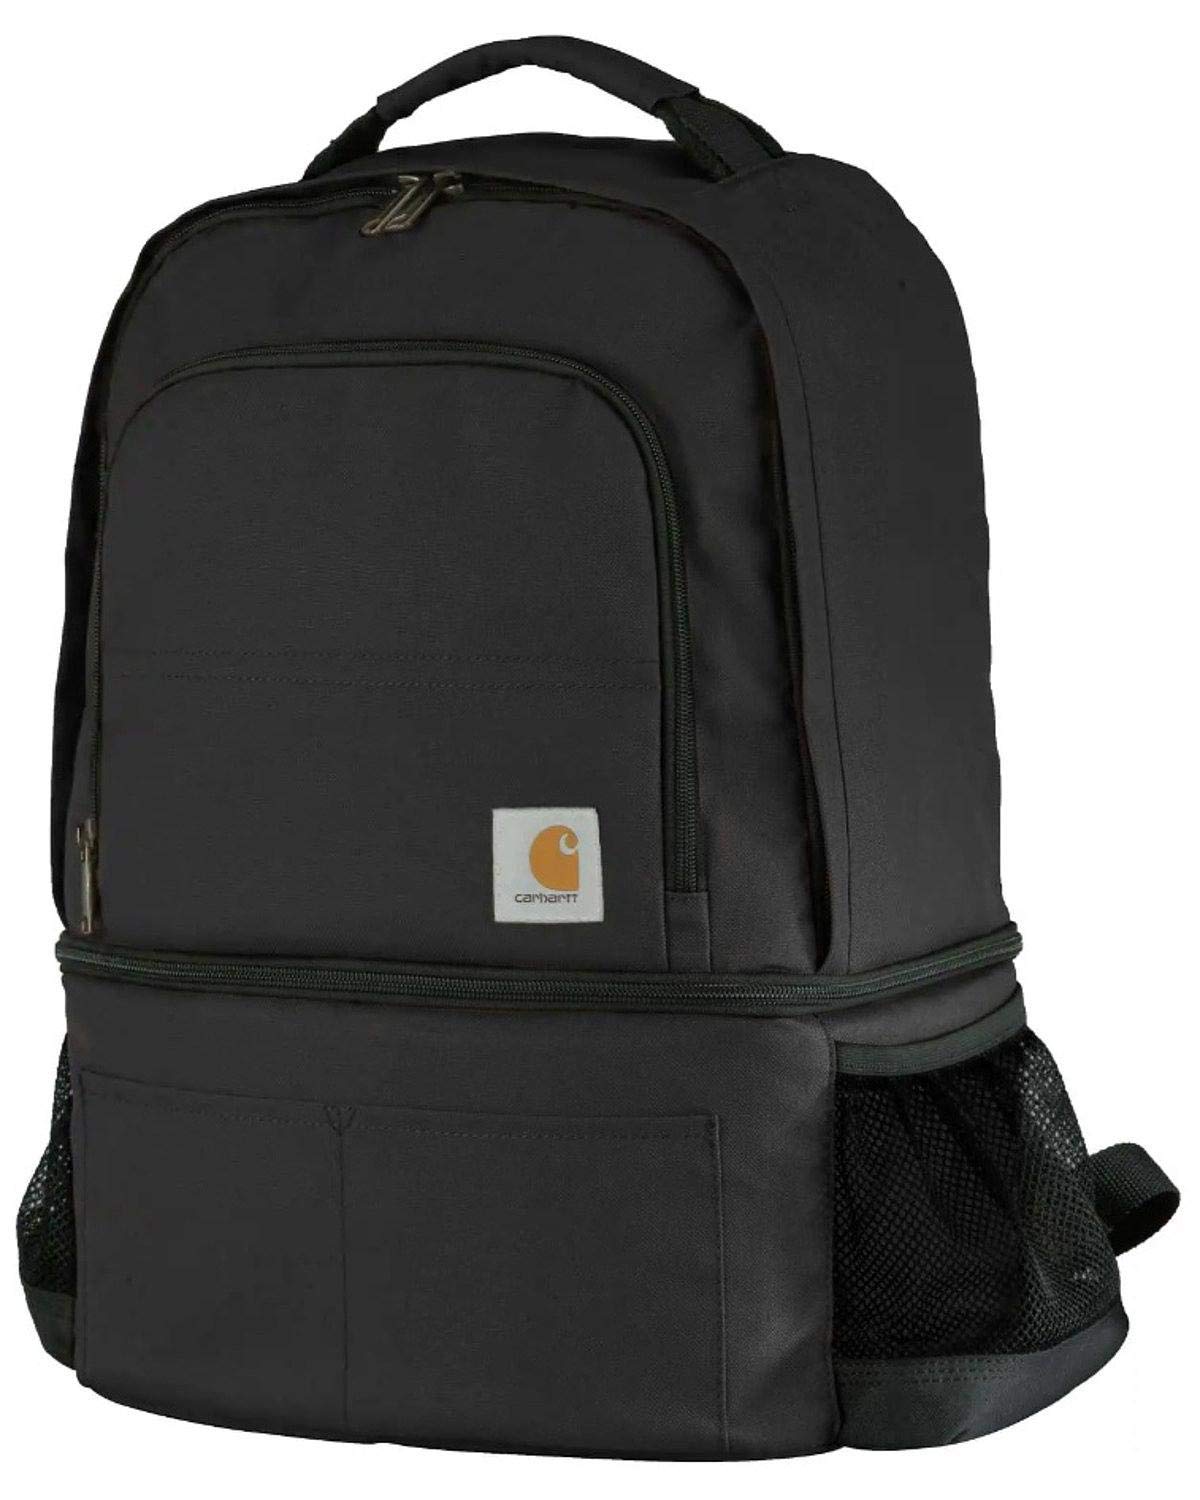 Carhartt Gear B0000279 25L Classic Laptop Backpack - One Size Fits